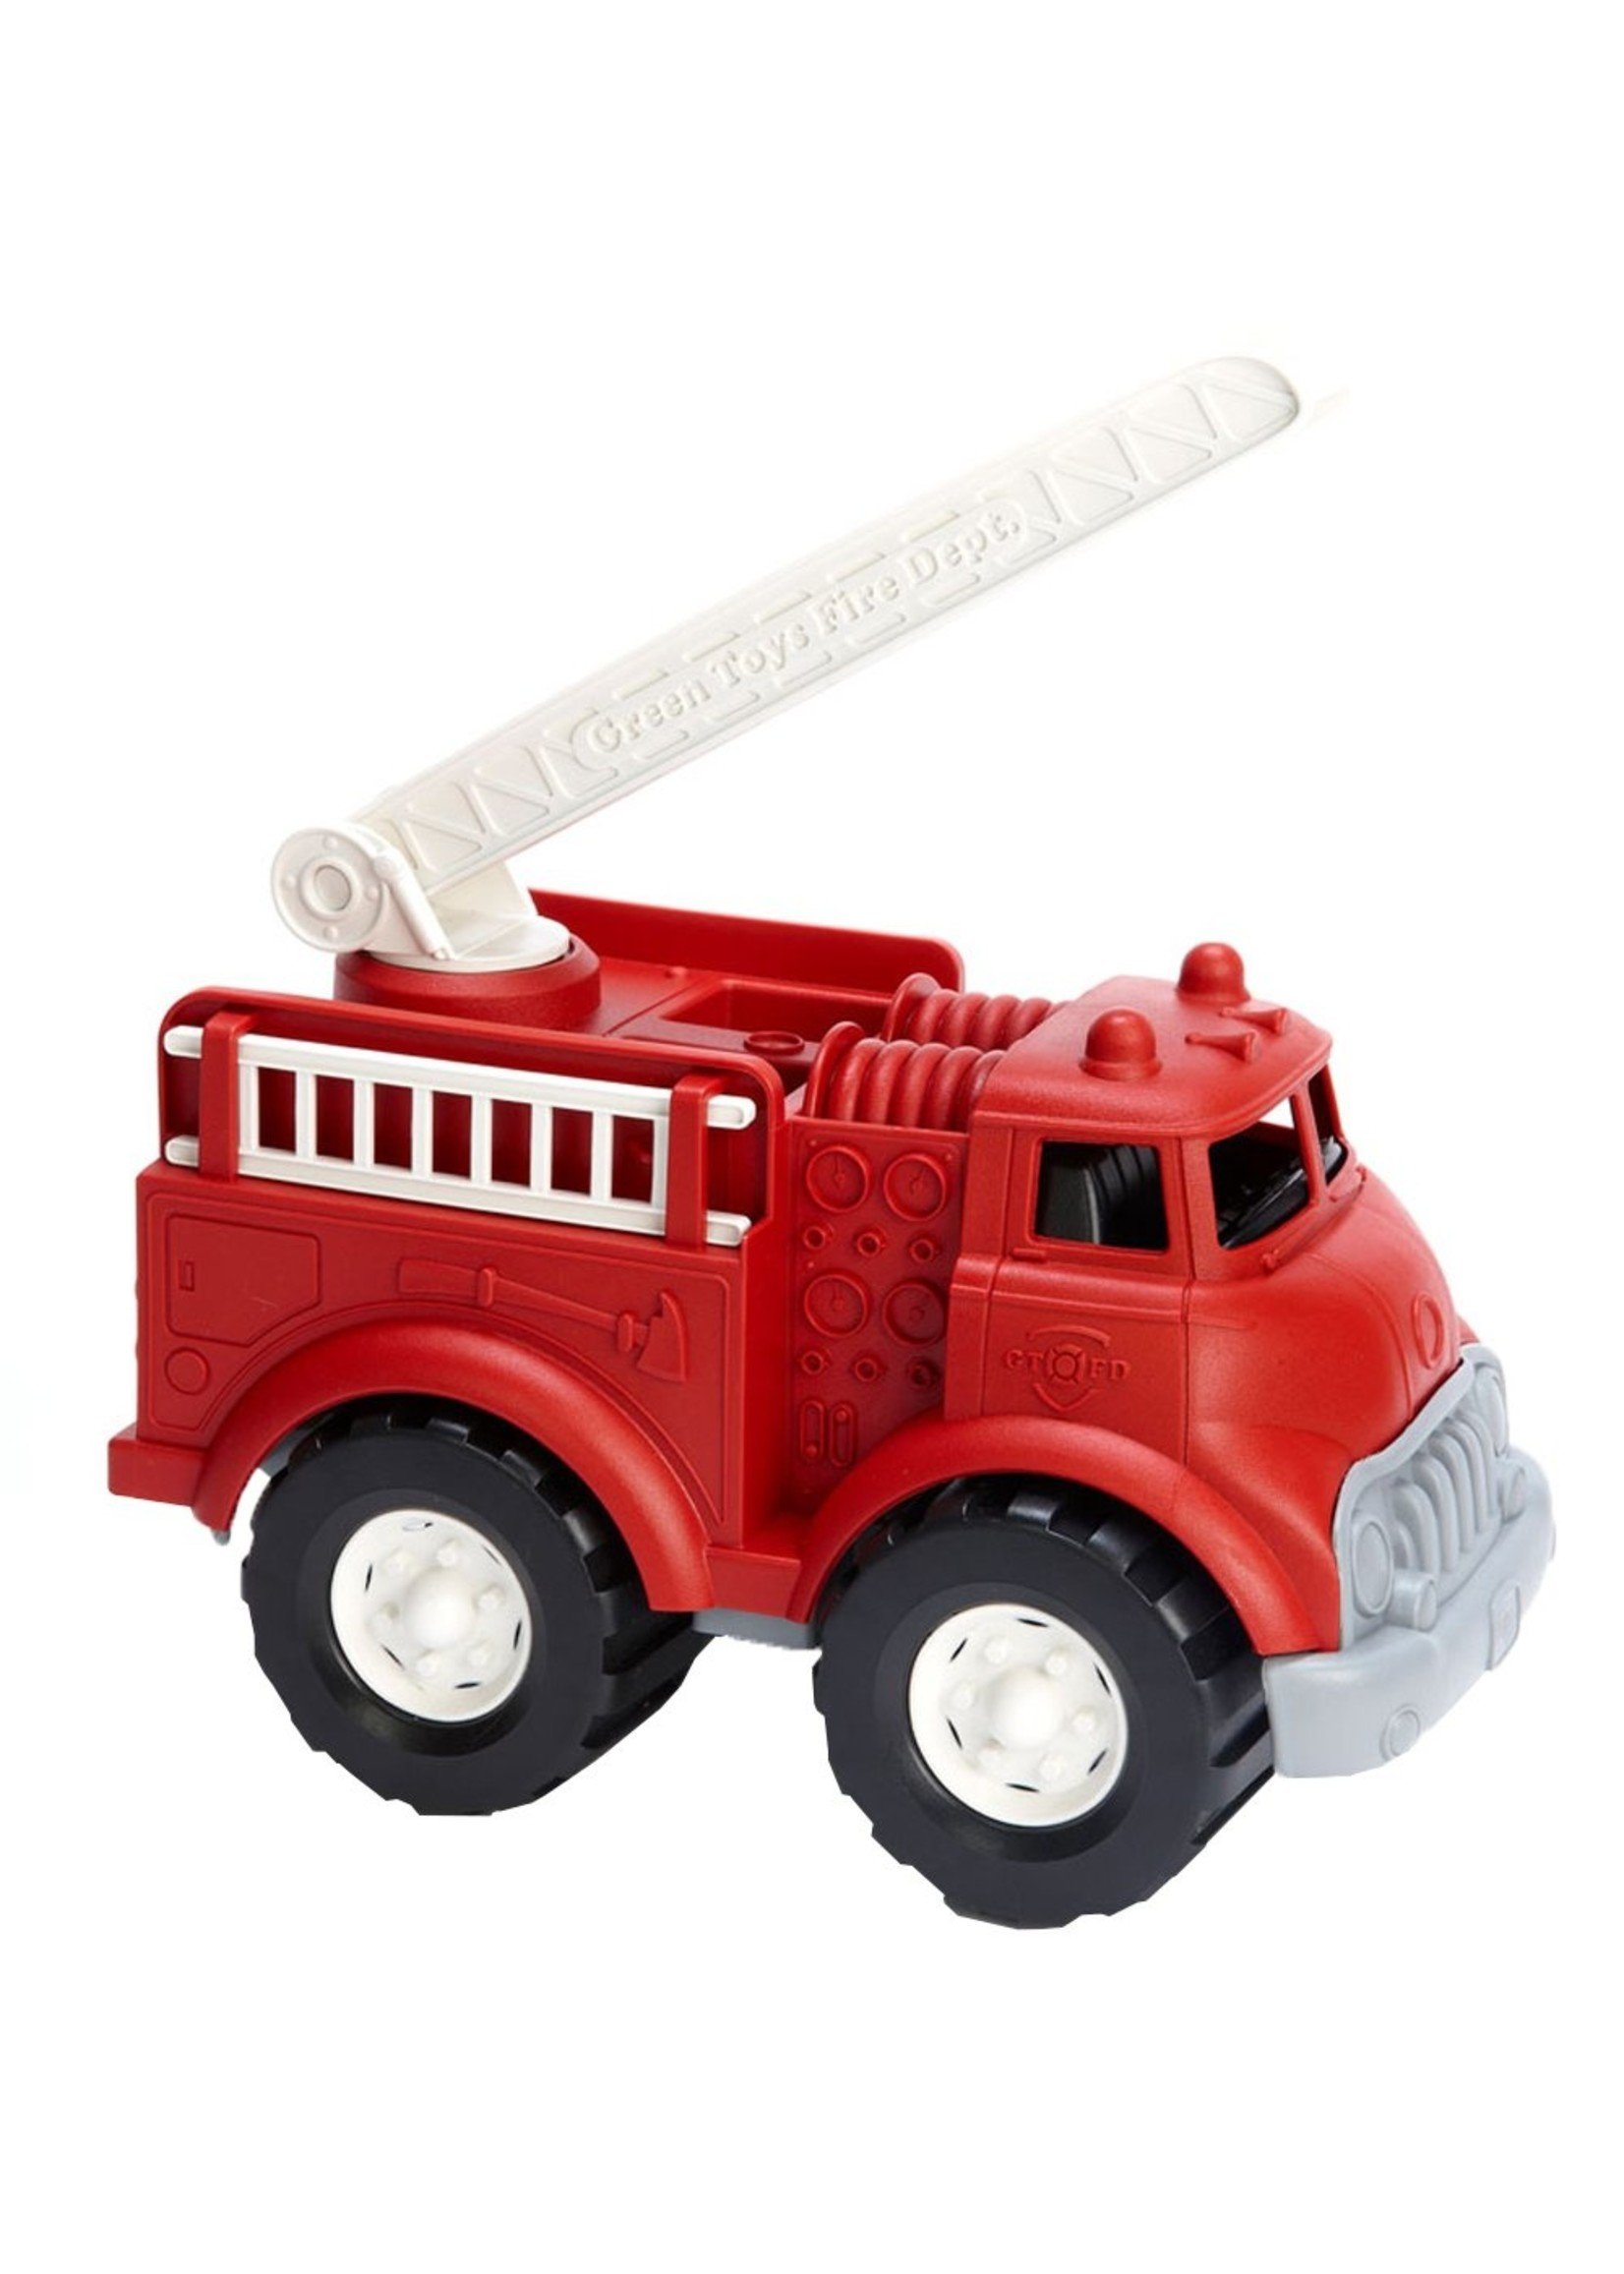 Green Toys Fire Truck in Red Color - BPA Free, Phthalates Free Play Toy